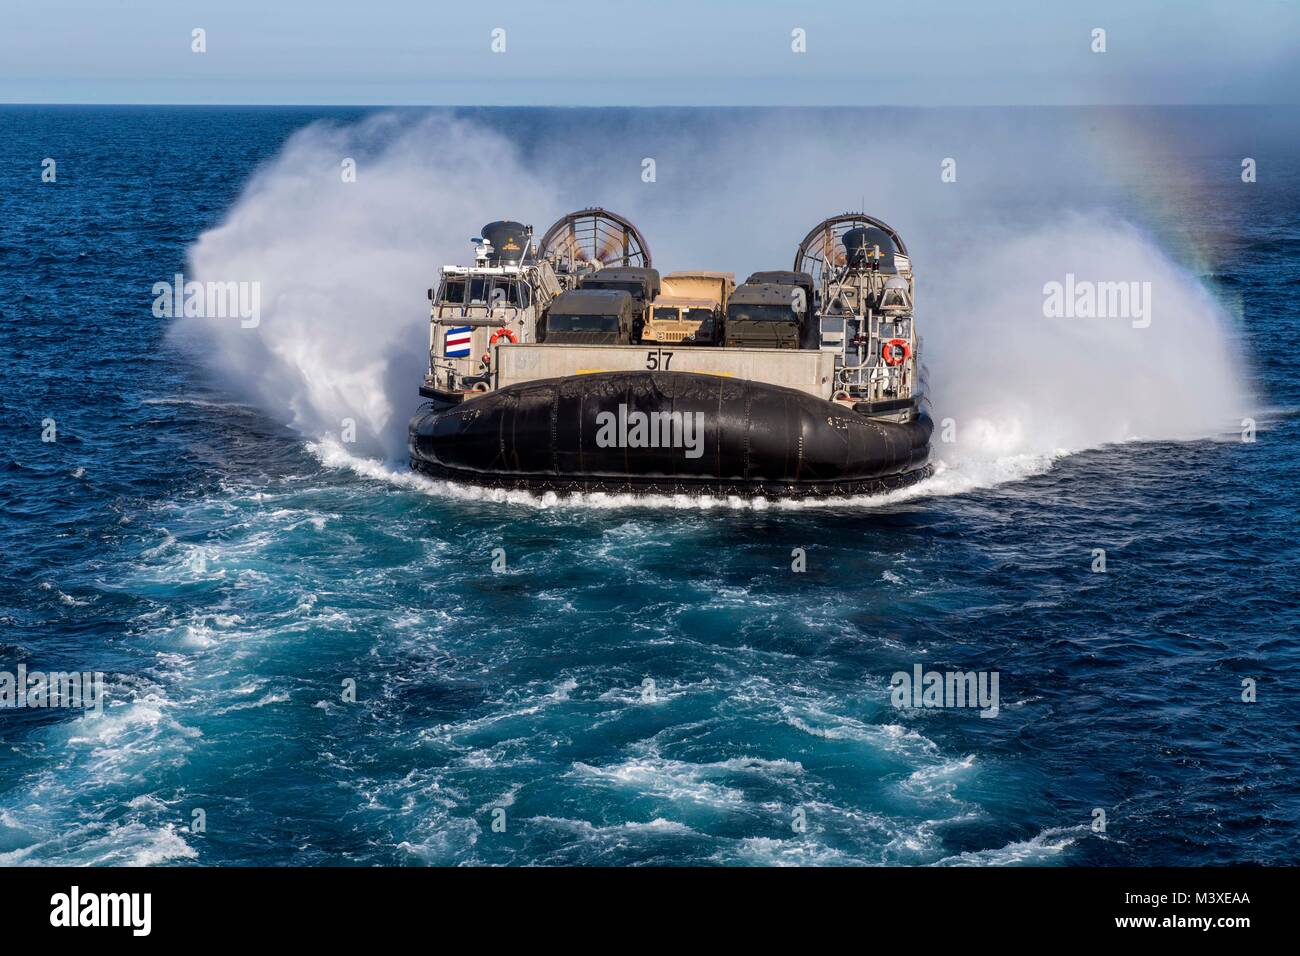 180203-N-GR847-314  PACIFIC OCEAN (Feb. 3, 2018) A Landing Craft Air Cushion vehicles (LCAC) conducts amphibious operations during Iron Fist 2018. Rushmore is underway off the coast of Southern California in support of the amphibious portion of the exercise. Iron Fist is an annual, bilateral amphibious training exercise designed to improve the U.S. Marine Corps and the Japanese Ground Self-Defense Force’s ability to plan, communicate and conduct combined amphibious operations at the platoon, company and battalion levels. (U.S. Navy photo by Mass Communication Specialist 3rd Class Reymundo A. V Stock Photo